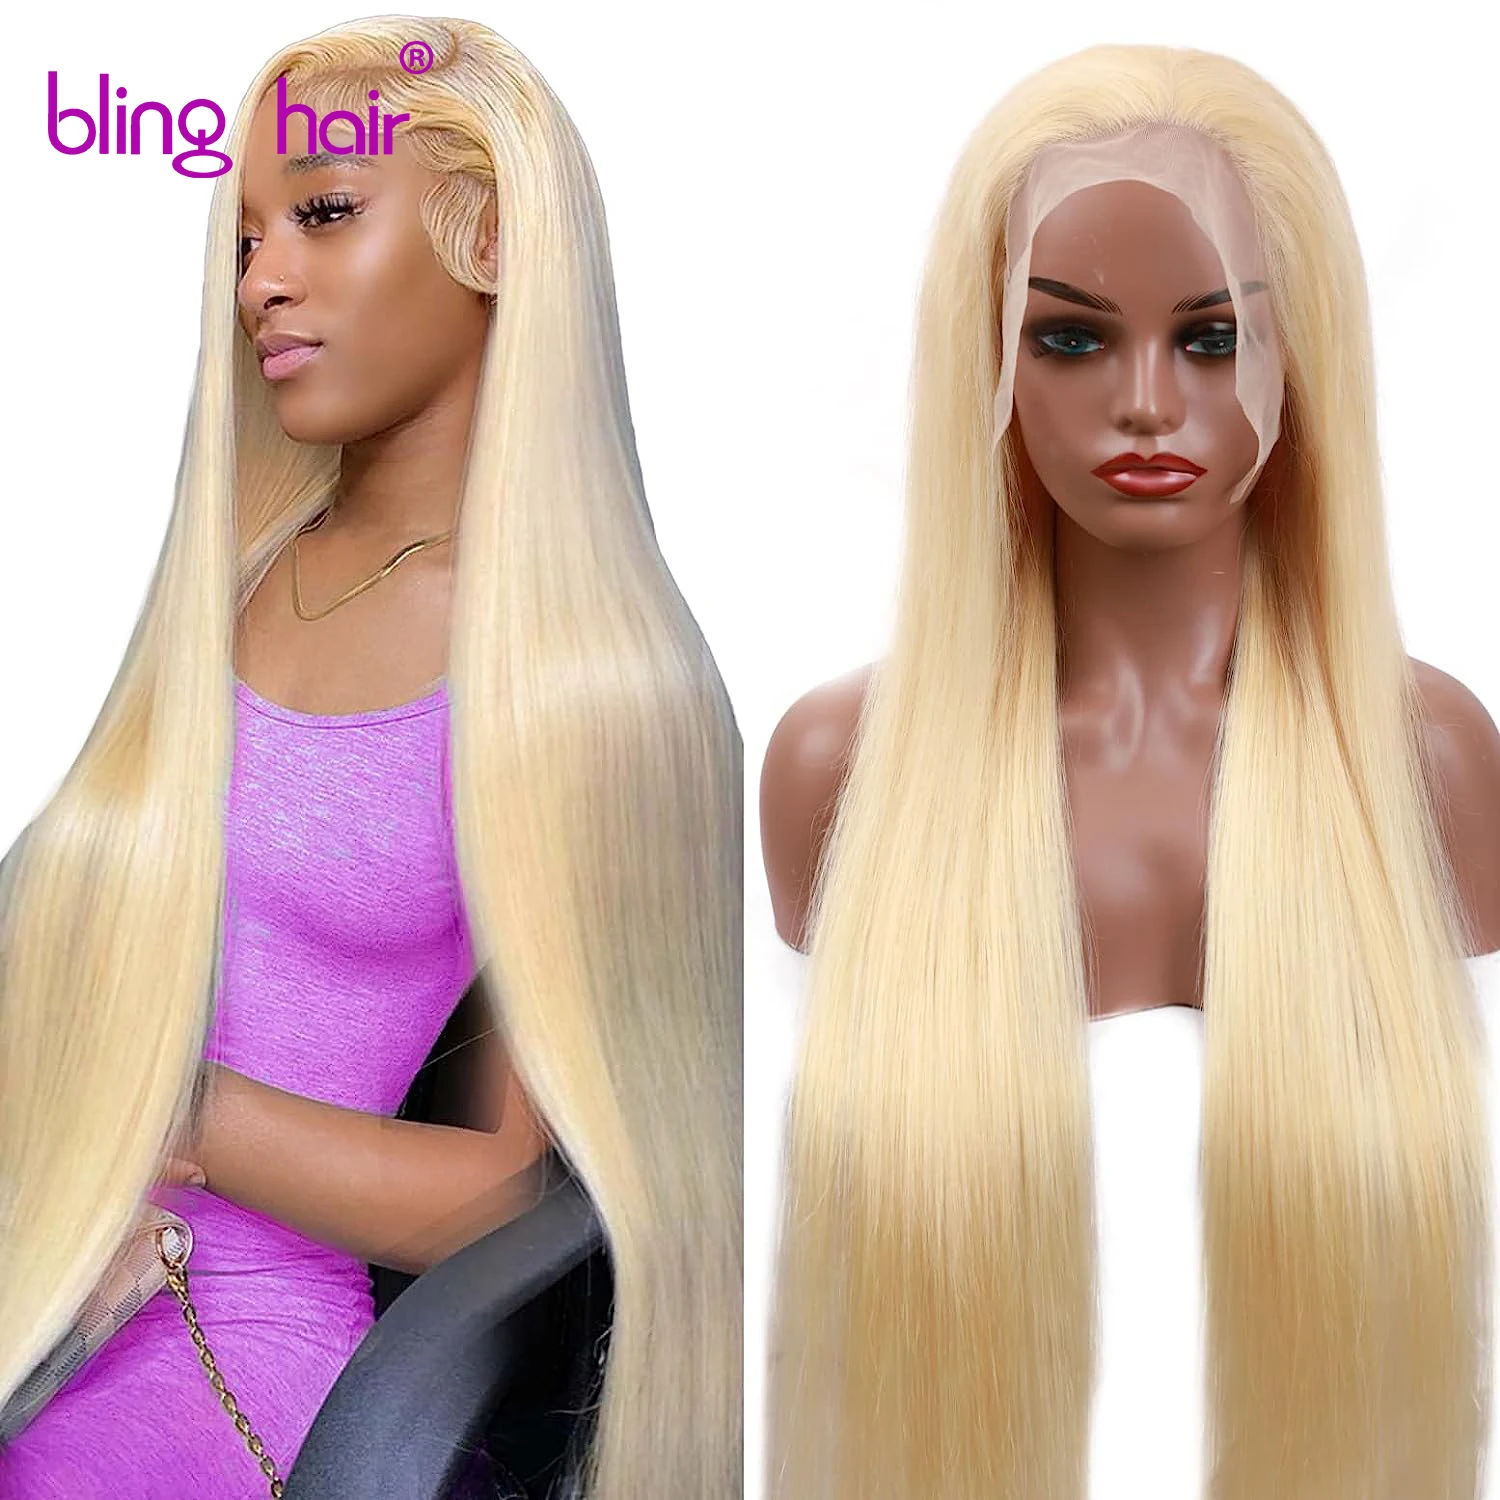 

613 HD Lace Frontal Wig 13x6 Straight Human Hair Wigs Pre Plucked Bleached Knots Bling Remy Blonde Lace Front Human Hair Wigs